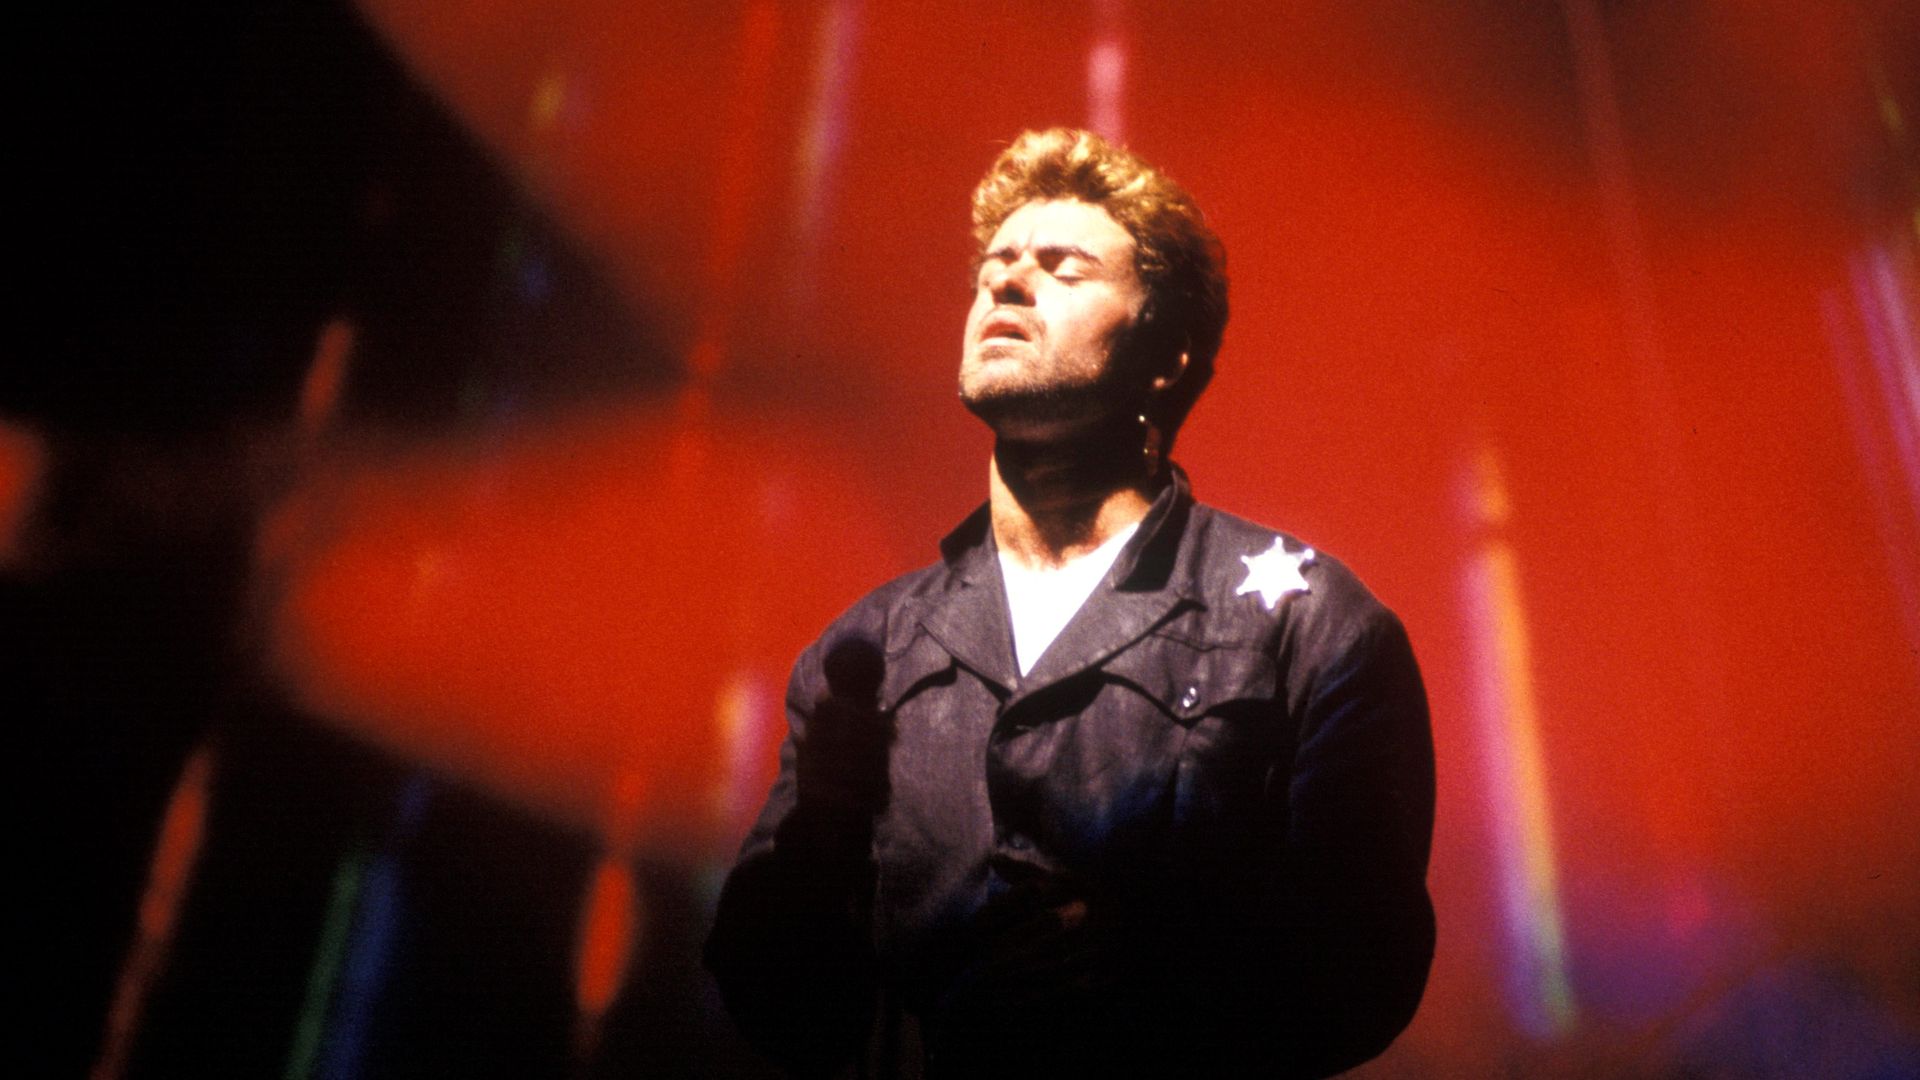 Singer George Michael stands under a re dspotlight.